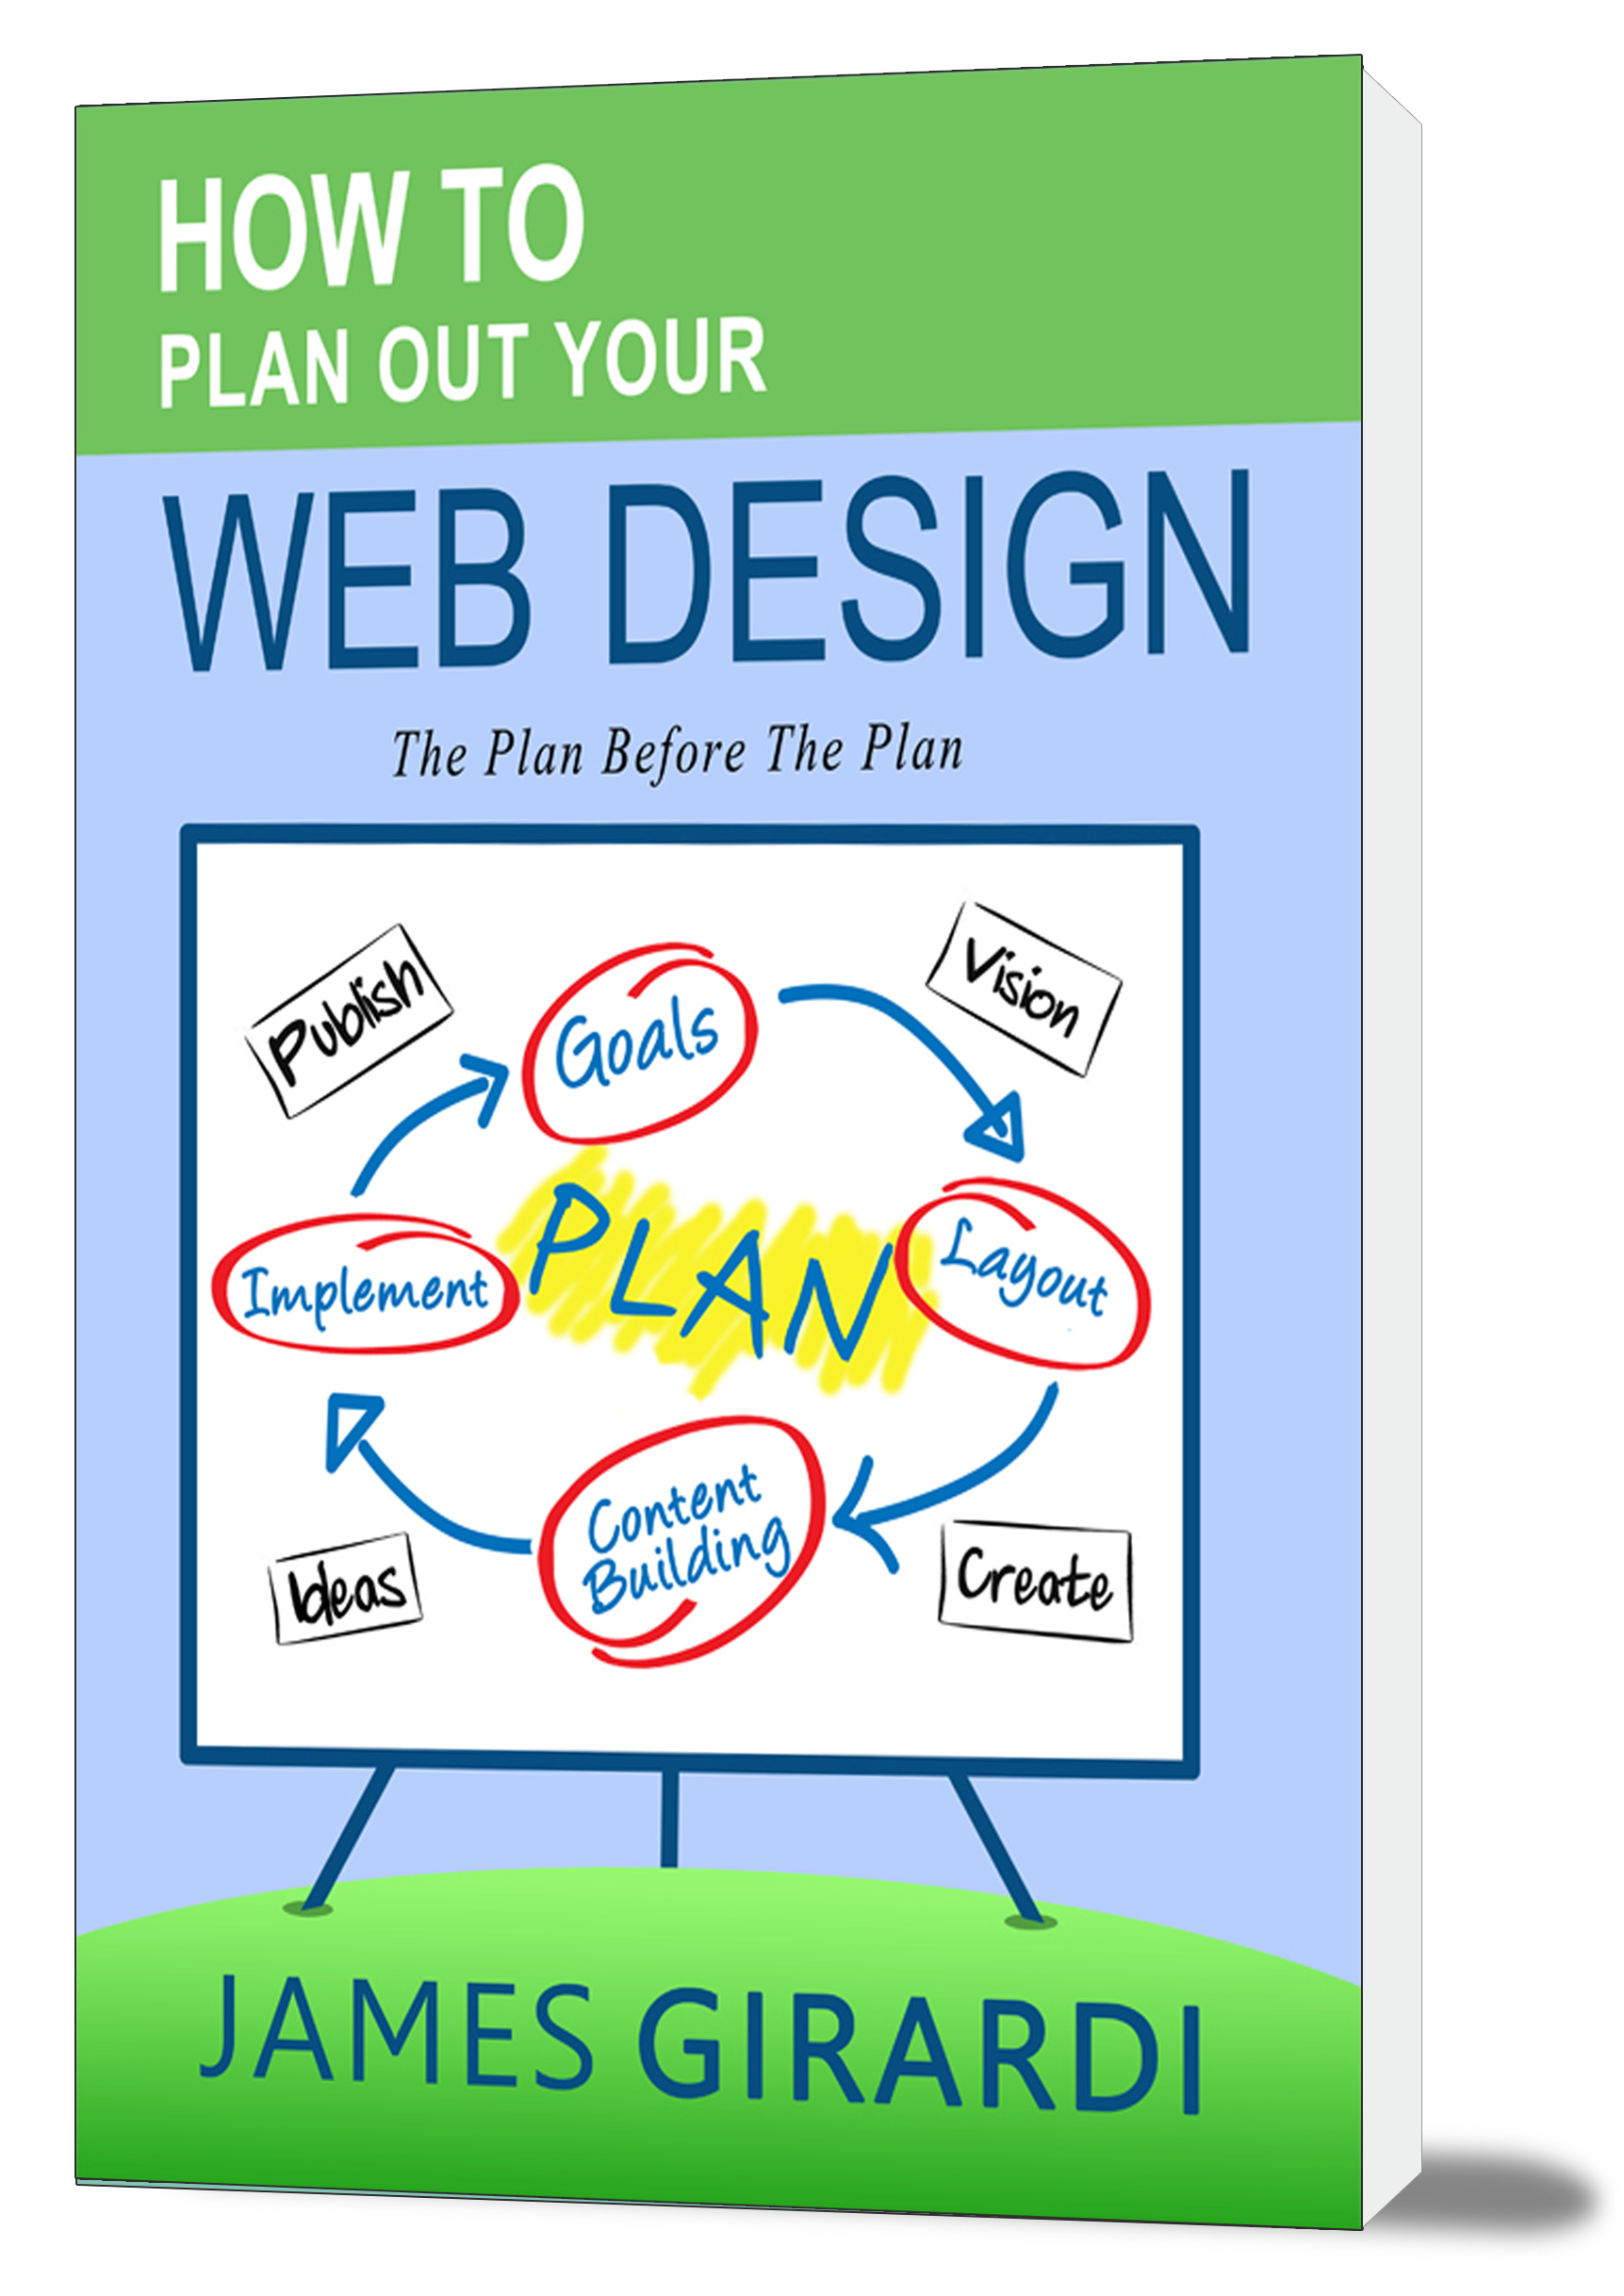 Book on How to plan out your web design by James Girardi